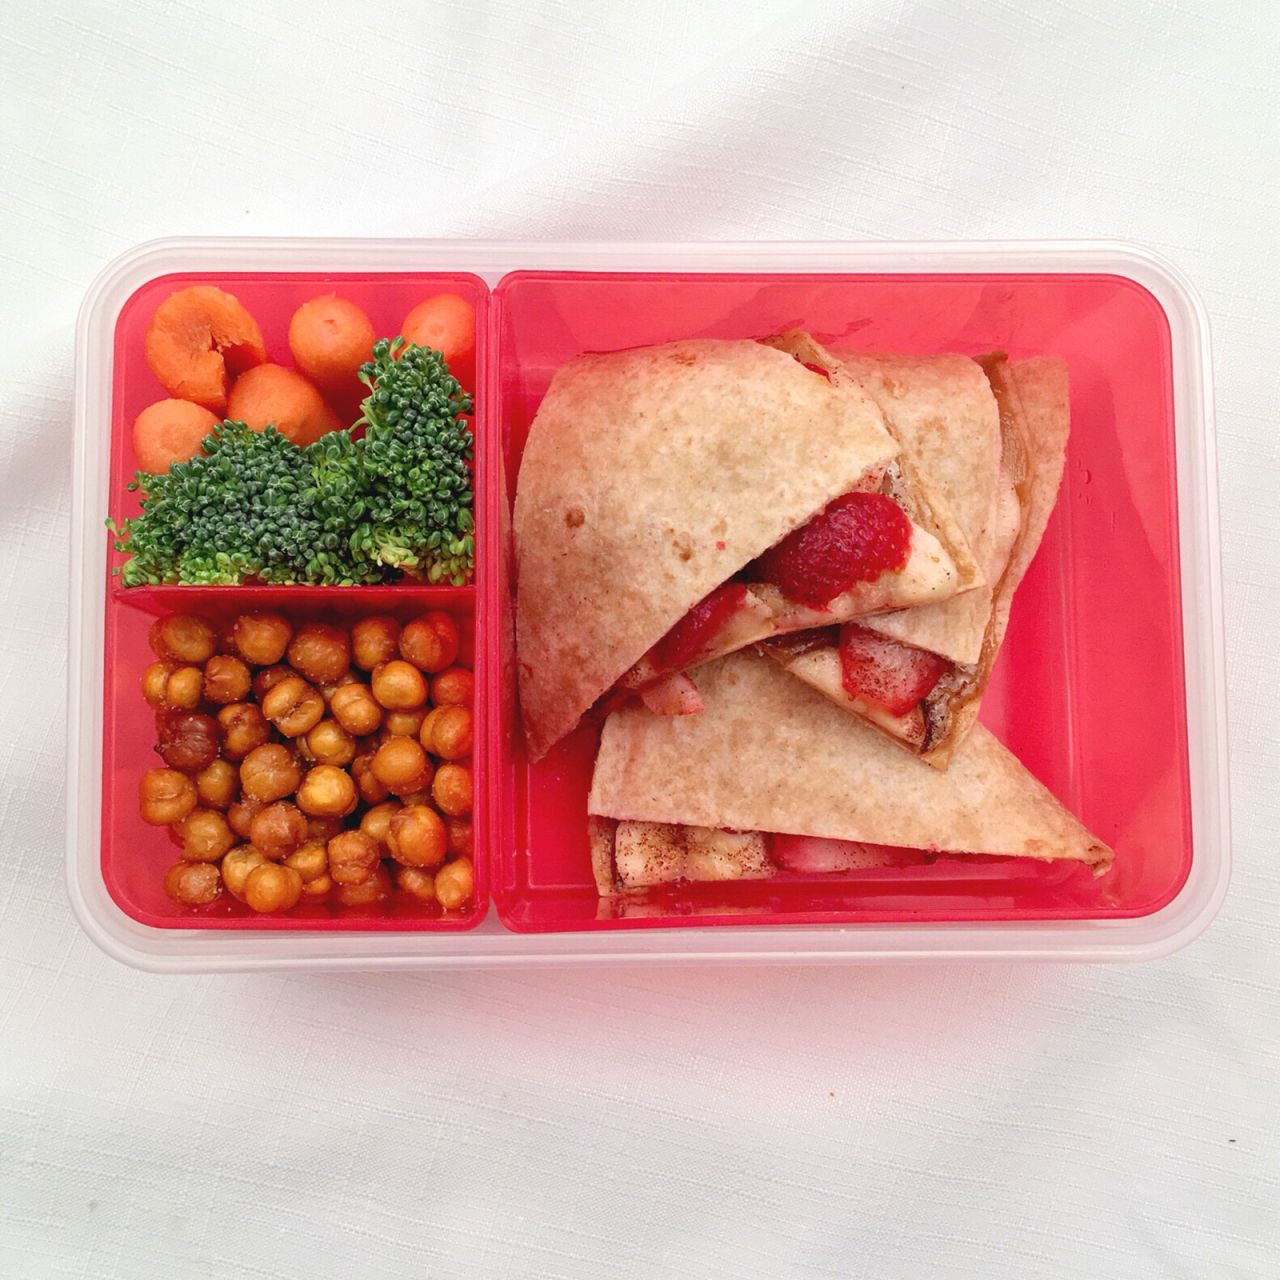 Banana and strawberry slices add sweetness to this tasty <a href="http://www.lisadrayer.com/kids-in-the-kitchen-sunflower-butter-quesadilla/" target="_blank" target="_blank">sunflower butter quesadilla</a>. This meal works well for kids with peanut allergies.